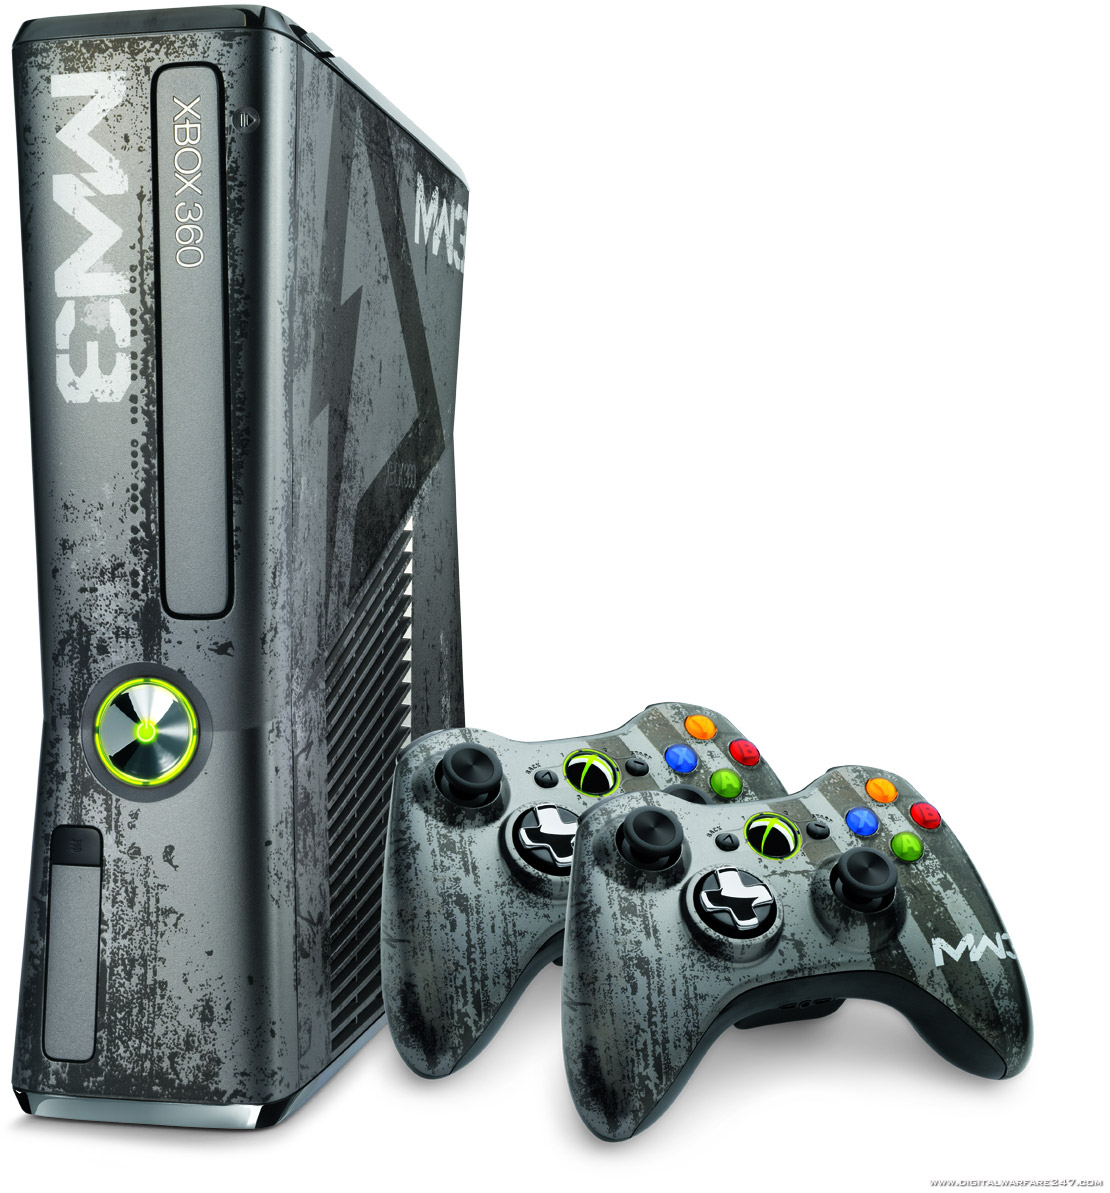 http://rozup.ir/up/gamehouse/Pictures/mw3-xbox-console-07.jpg